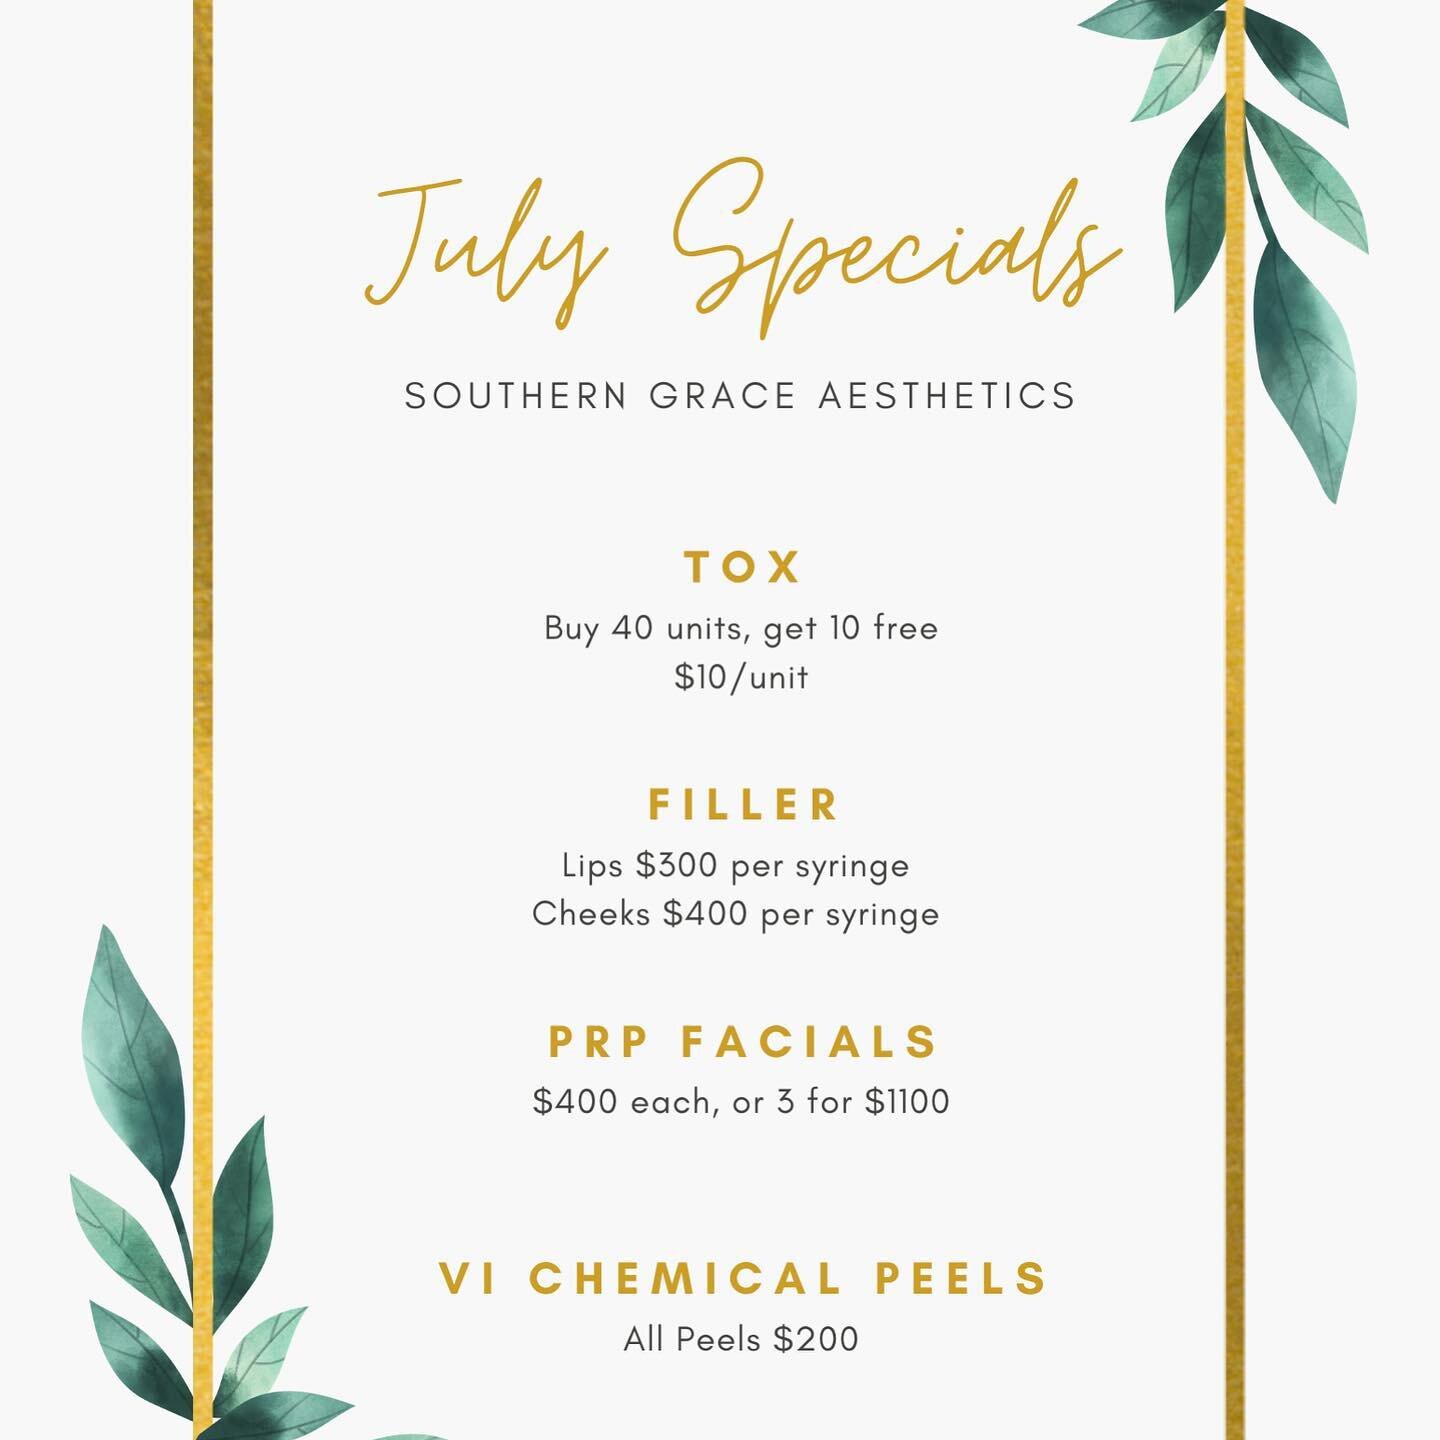 ☀️ 🌊 July is going by fast!! Book now to take advantage of our July specials!! 🌊☀️

💉 Botox Injections 💉
💋 Dermal Facial Fillers 💋
💉  PRP facials and facelifts 💉
☀️ VI Chemical Peels ☀️
🧴  Neocutis Medical Grade Skincare 🧴

www.southerngrac